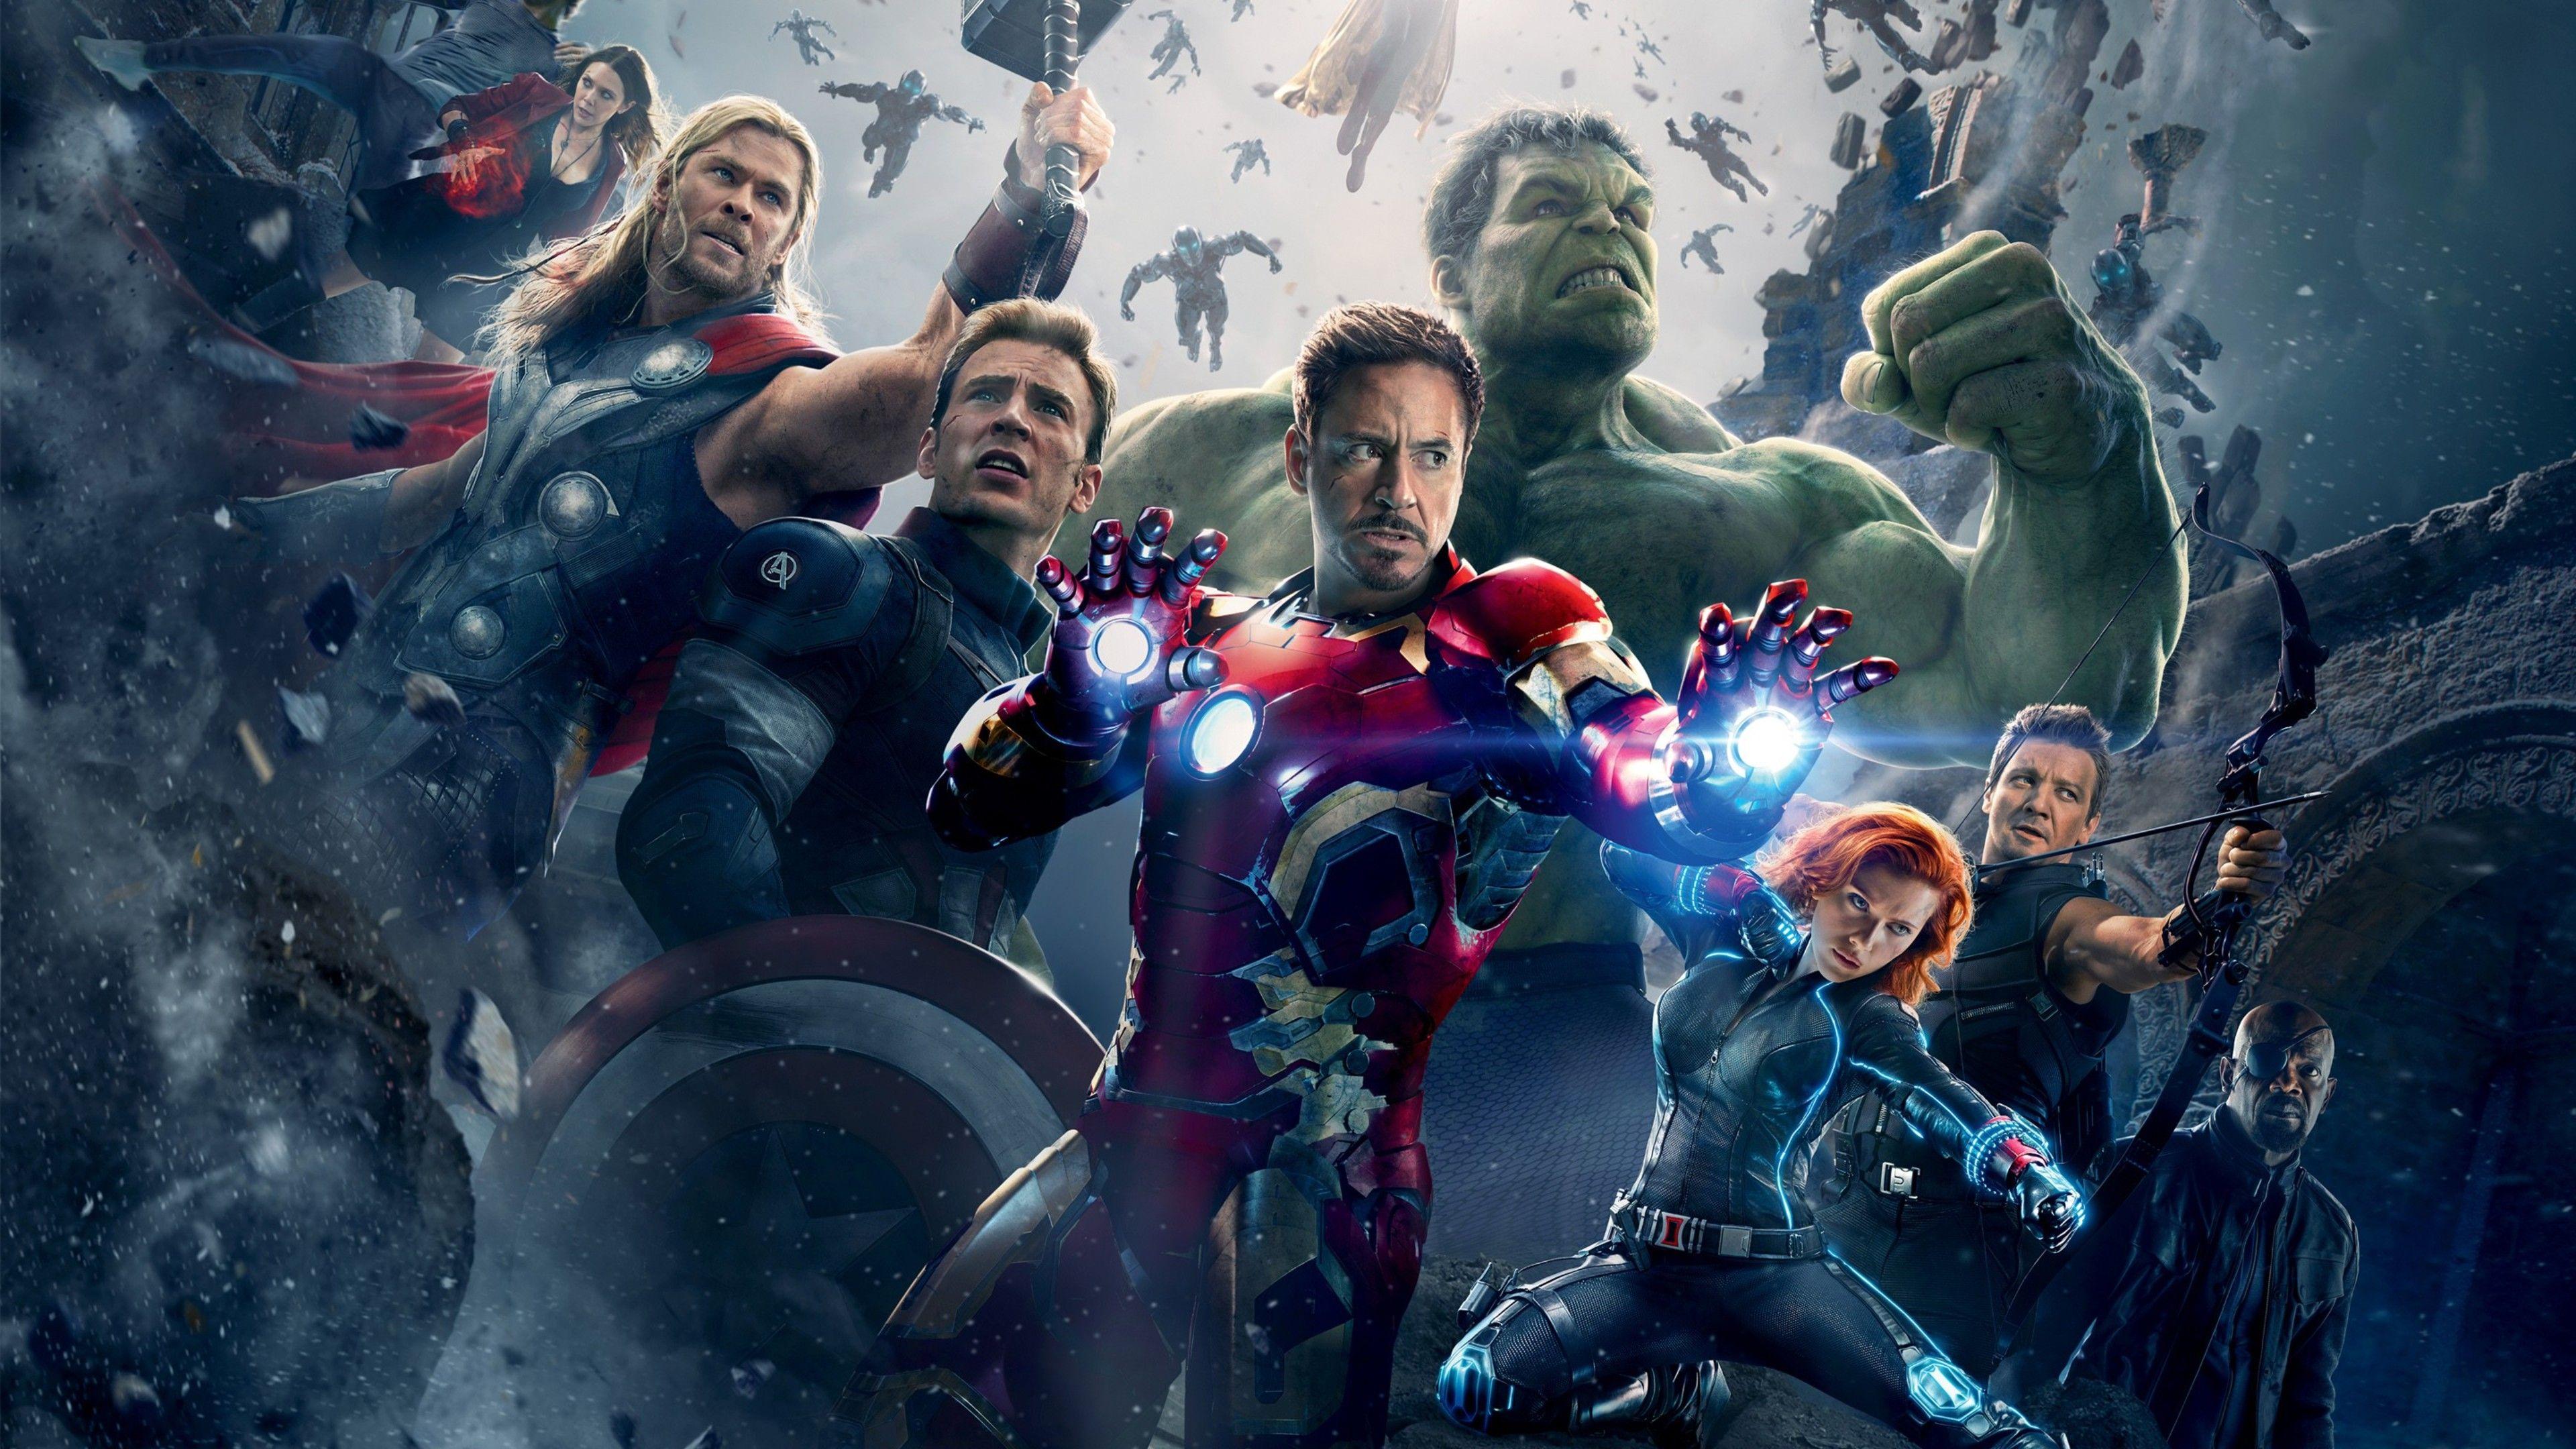 Avengers Age Of Ultron Wallpapers Top Free Avengers Age Of Images, Photos, Reviews